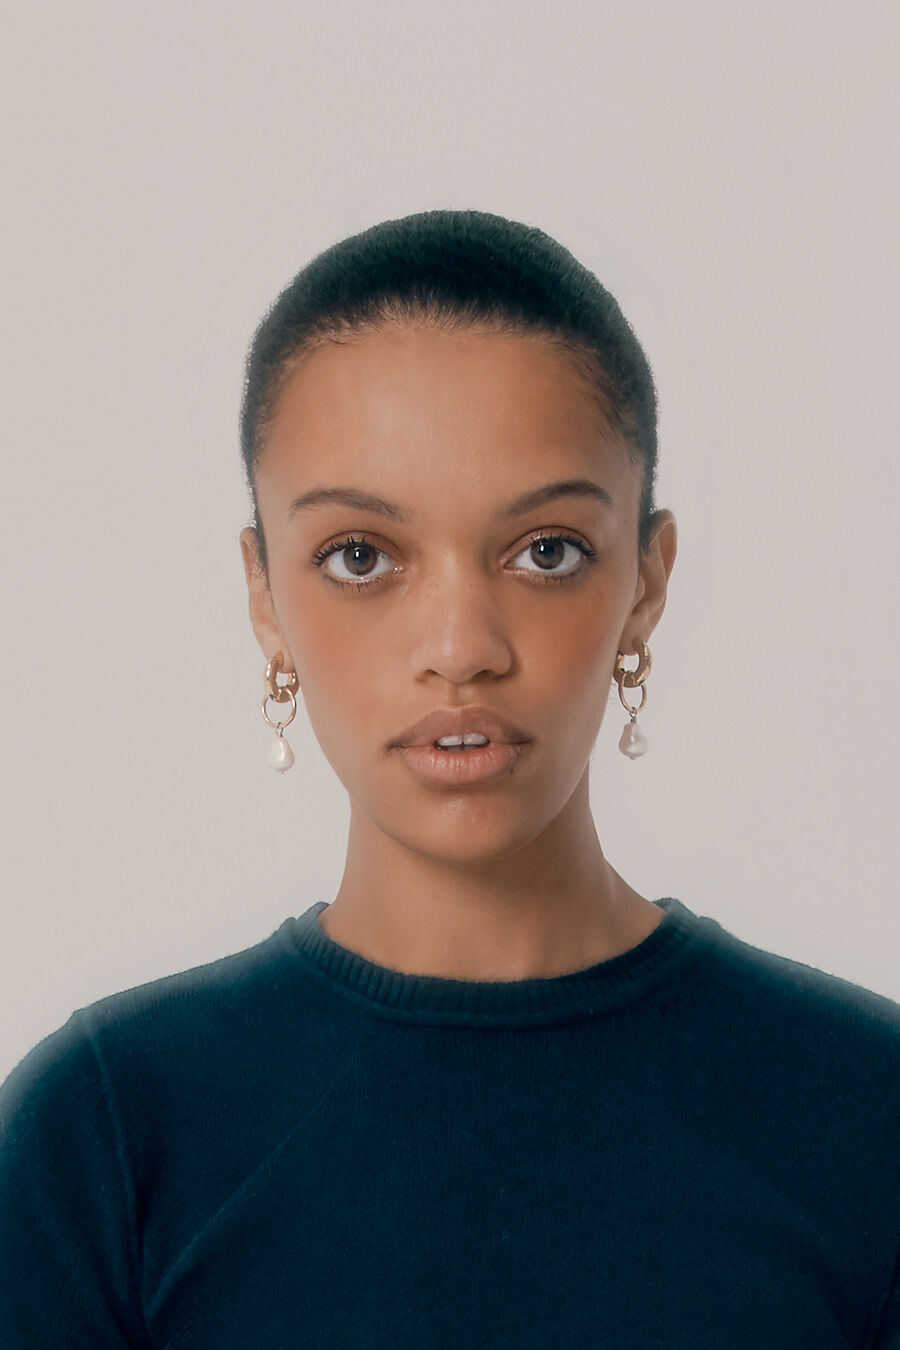 Woman facing forward with earrings and a sweater.